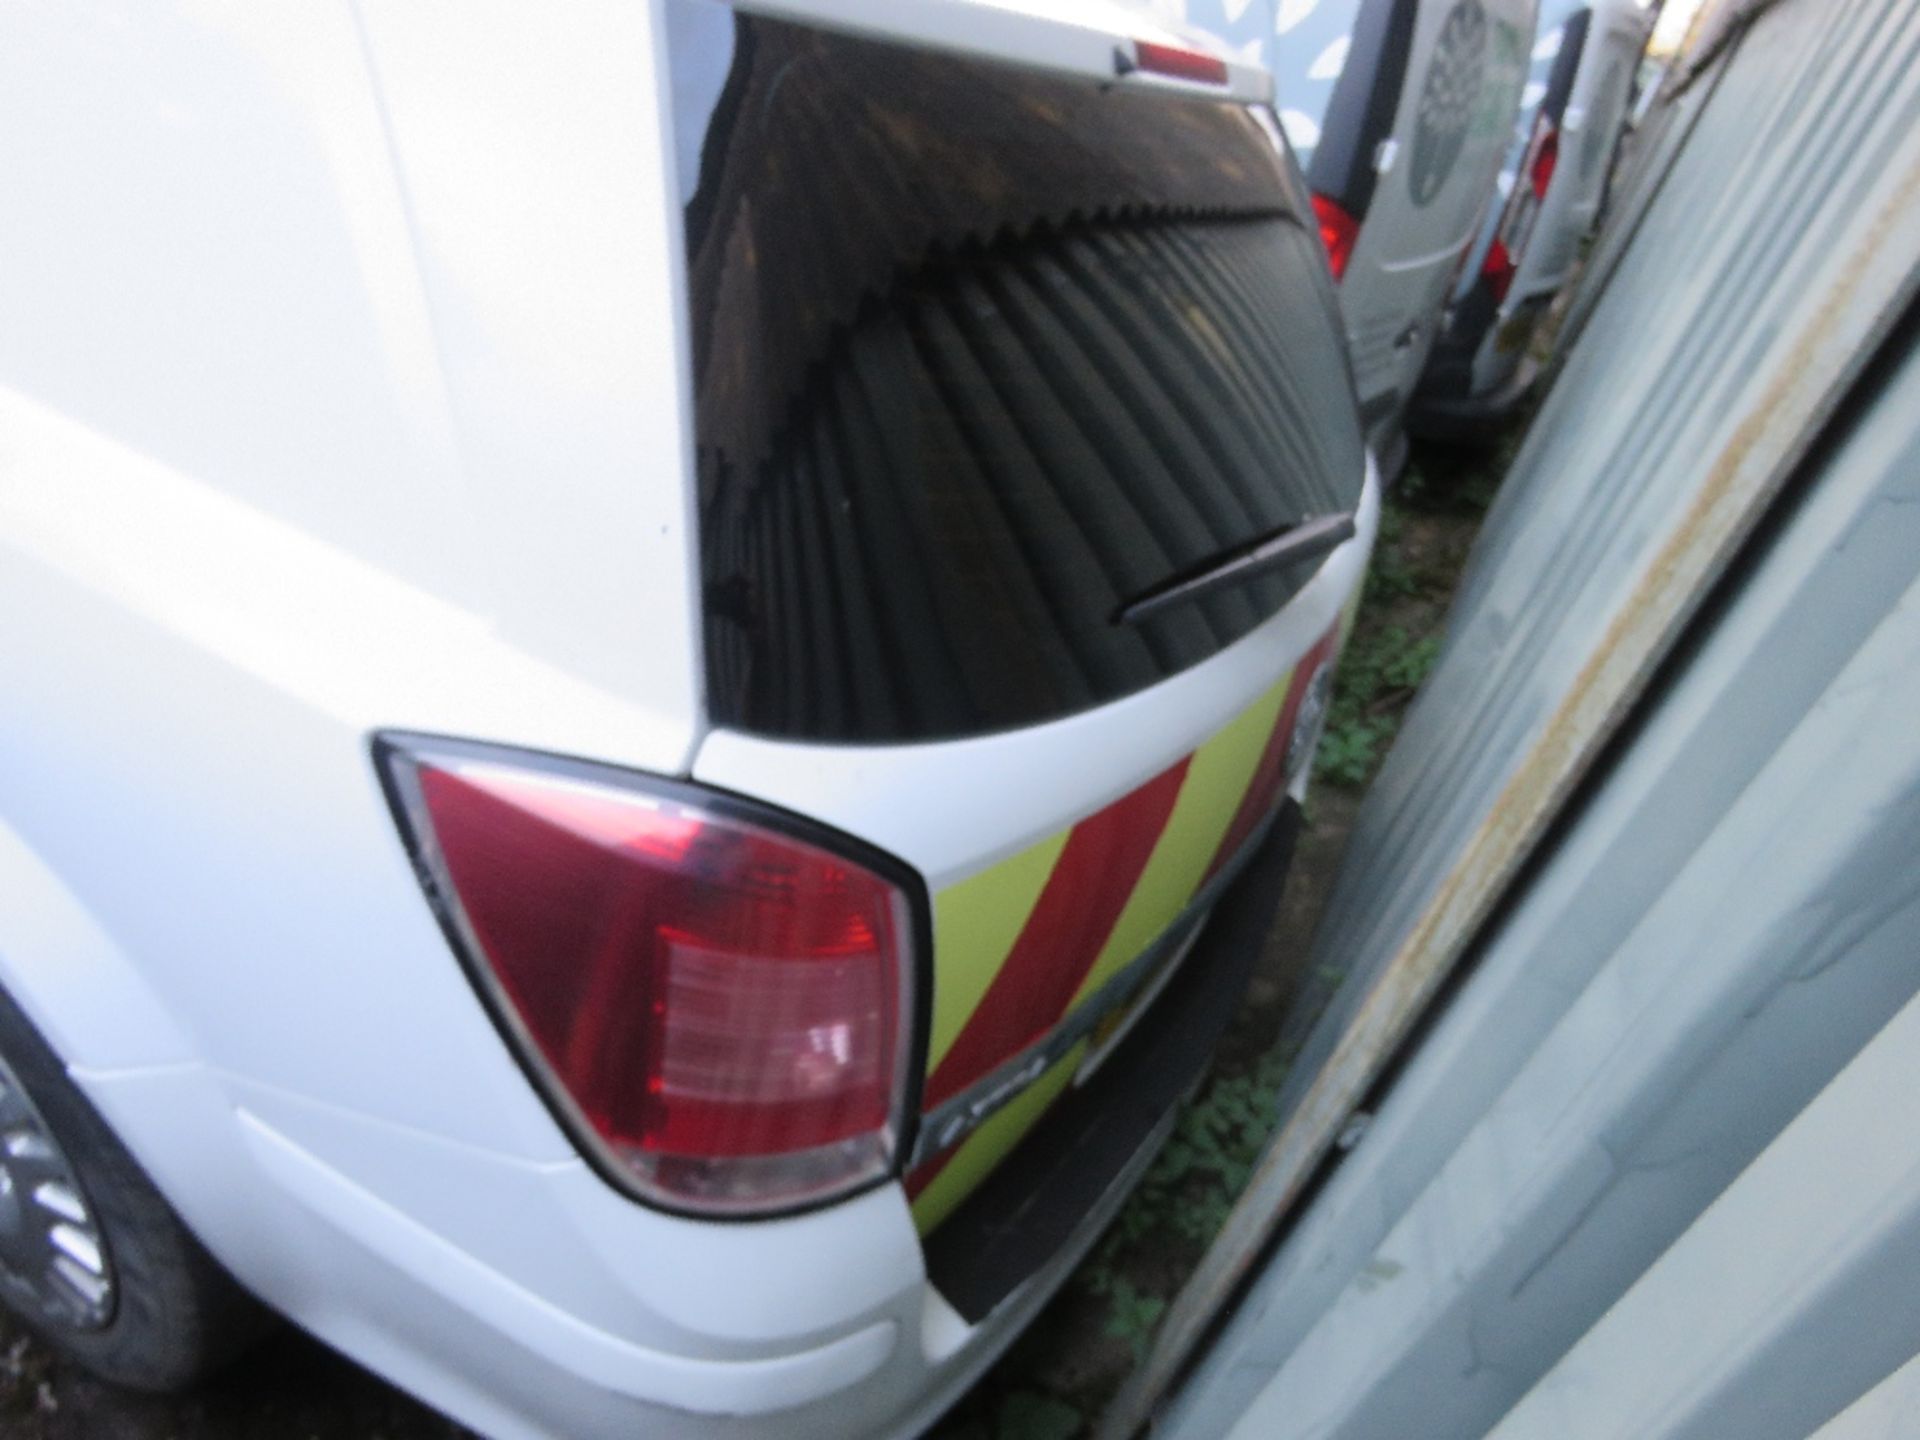 VAUXHALL ASTRA PANEL VAN REG:LM13 AHZ WITH V5 (TEST EXPIRED). THIS LOT IS SOLD UNDER THE AUCTION - Image 5 of 11